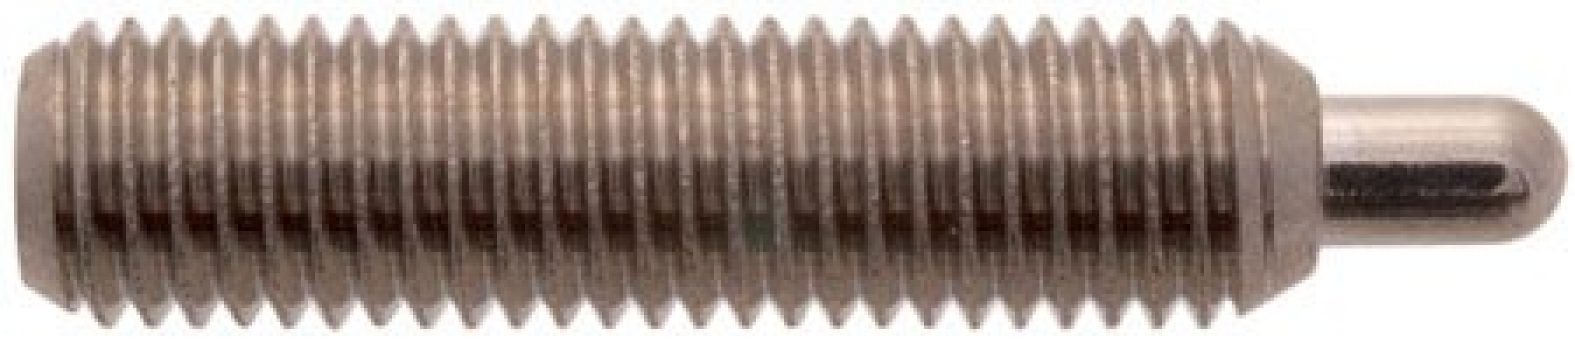 10-32 x 3/4, End Force - 11.1 lbs, Inch, Steel Body/Nose - Heavy End Pressure, Standard, Posi-Hex, Spring Plunger (1 Each)